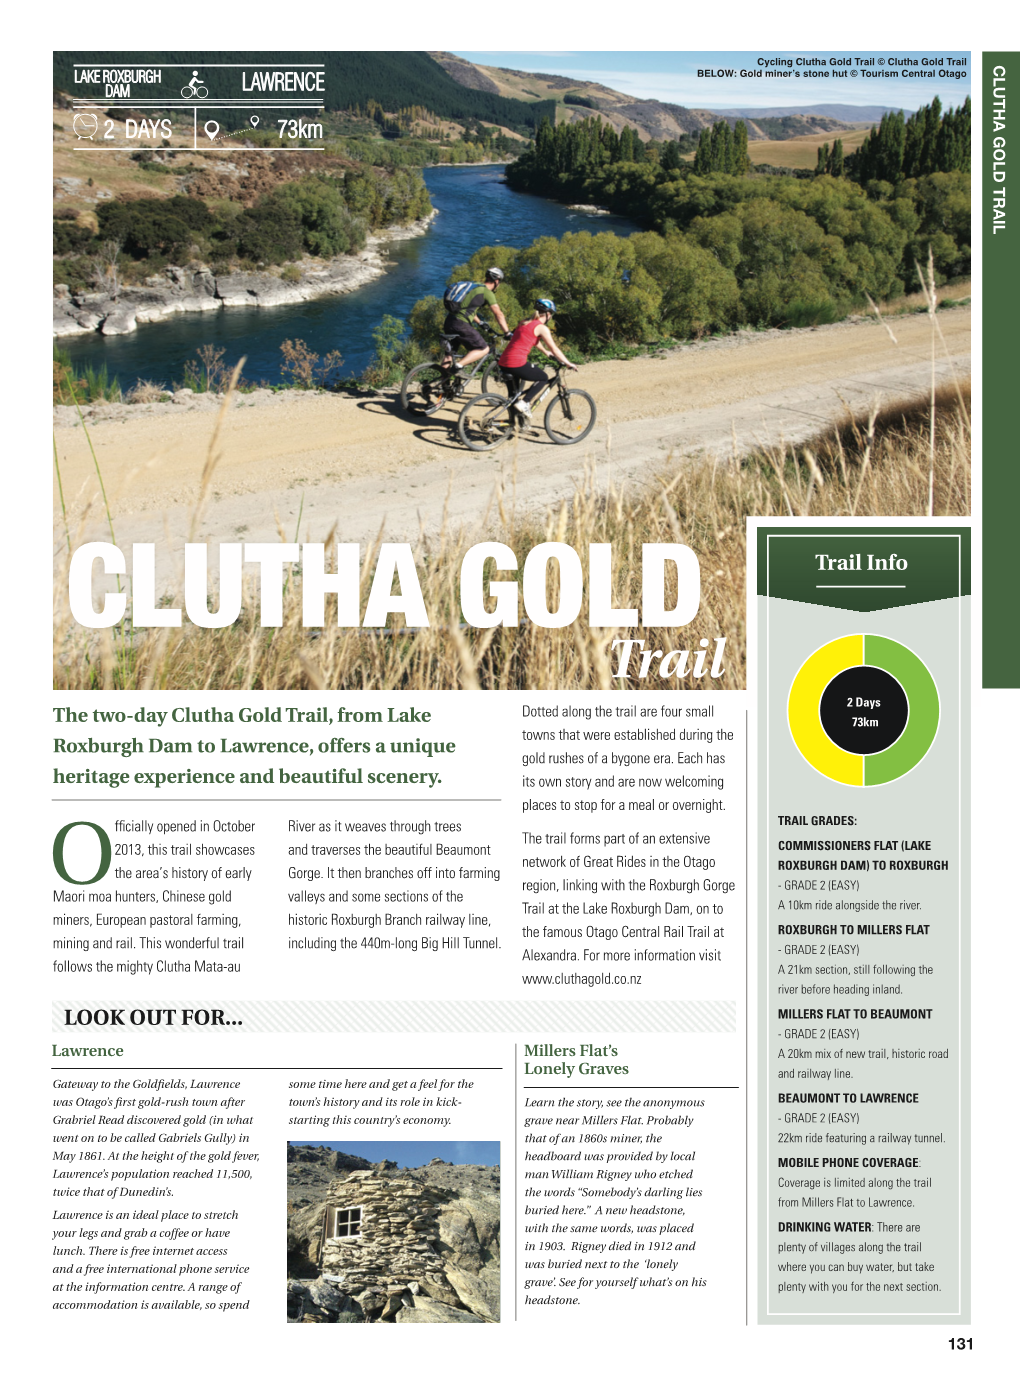 131-132 Clutha Gold Trail 2016.Indd